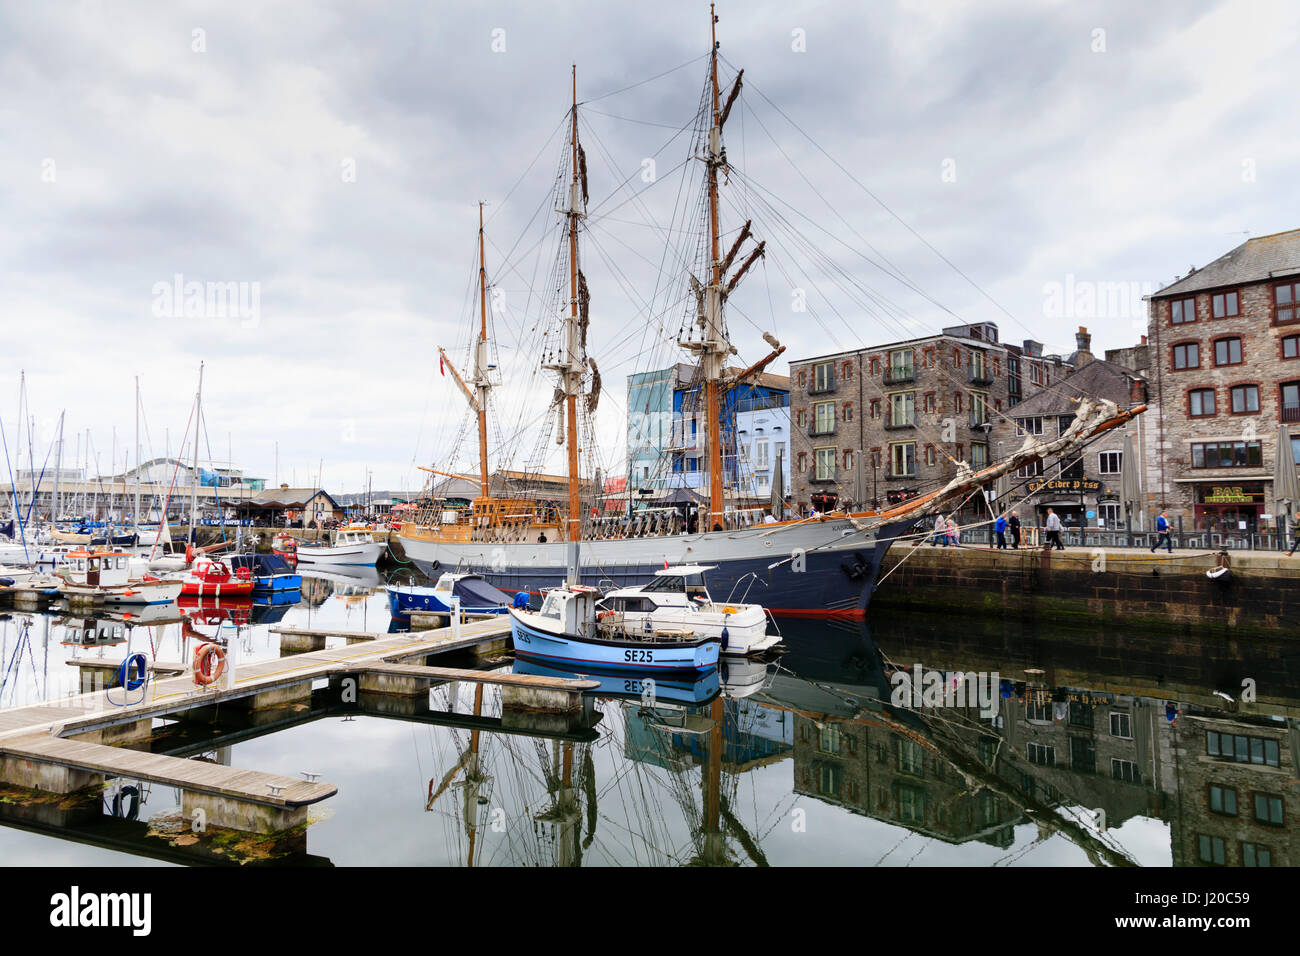 Tall Ship, S.V.Kaskelot, ormeggiata lungo il Barbican in Sutton Harbour, Plymouth UK, aprile 2017. Foto Stock